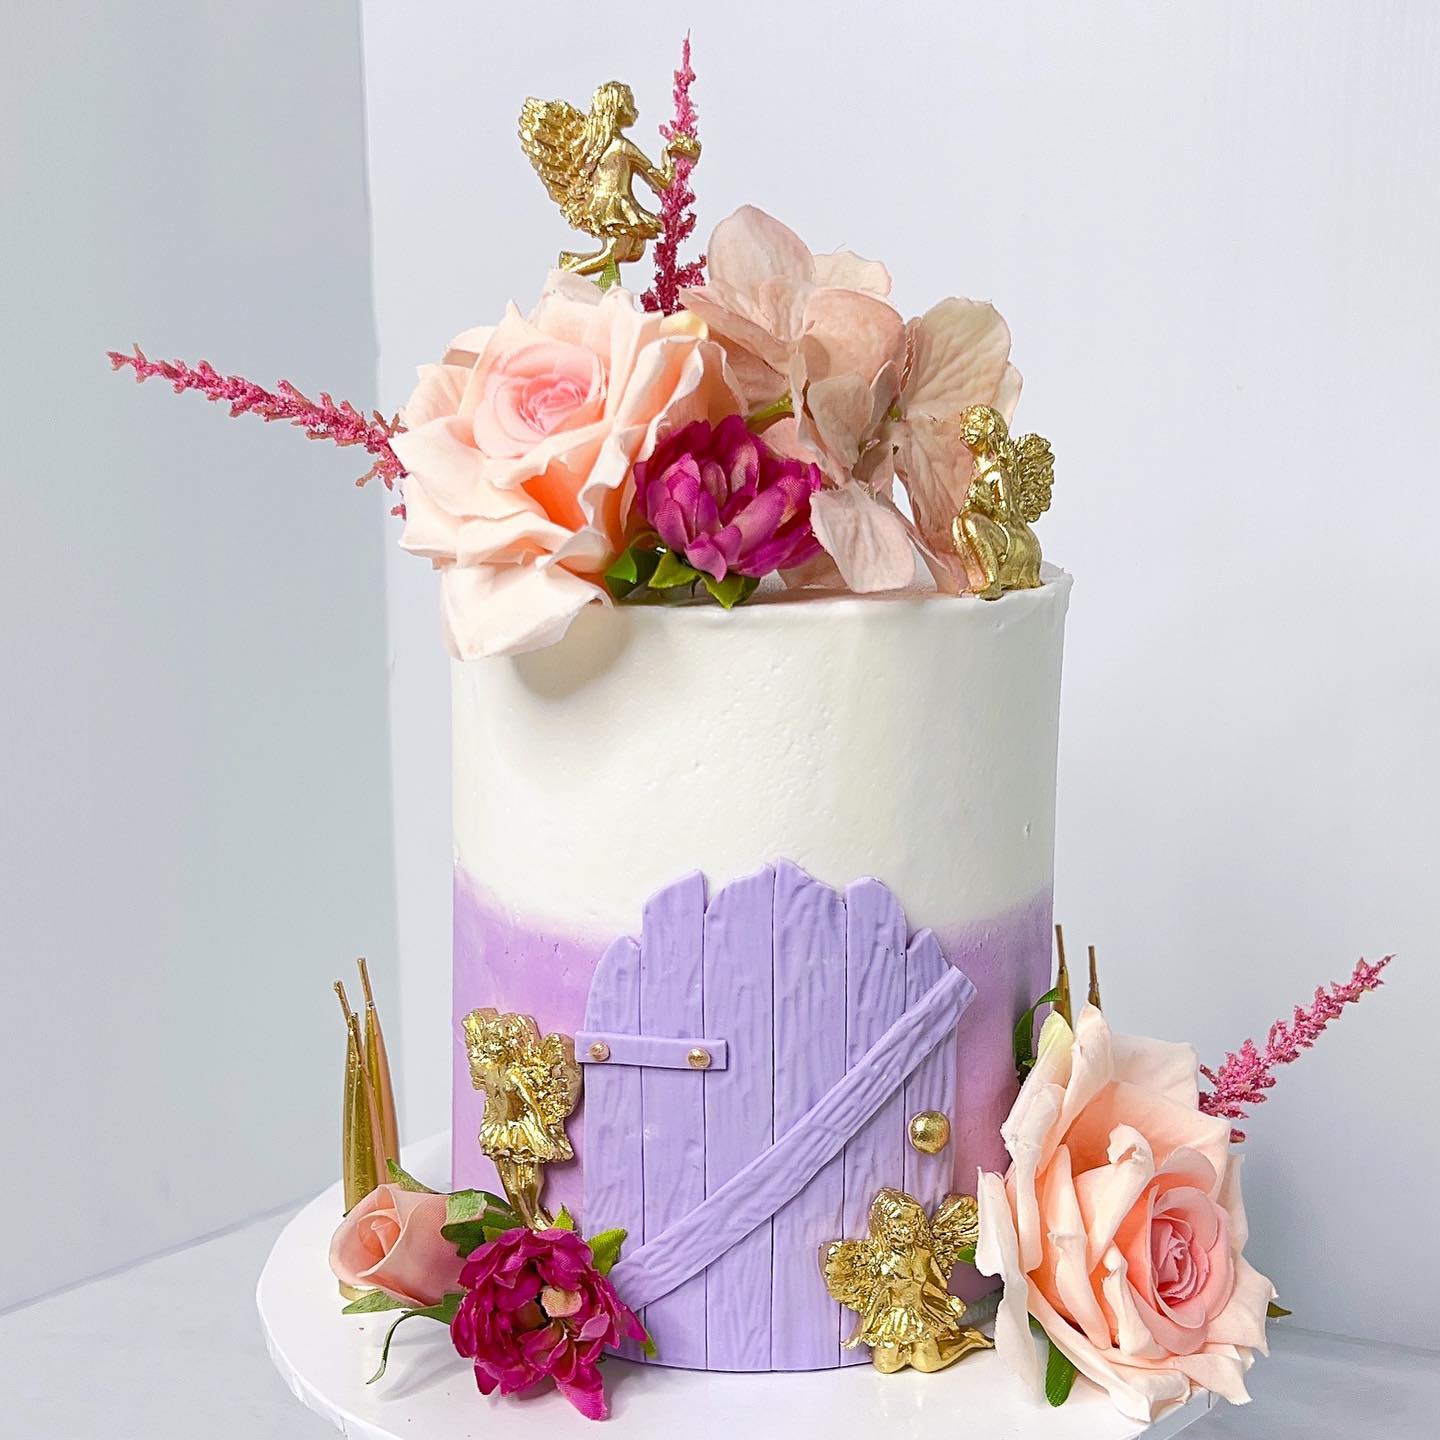 Unicorn cake: HERE Discover the most popular ideas ❤️